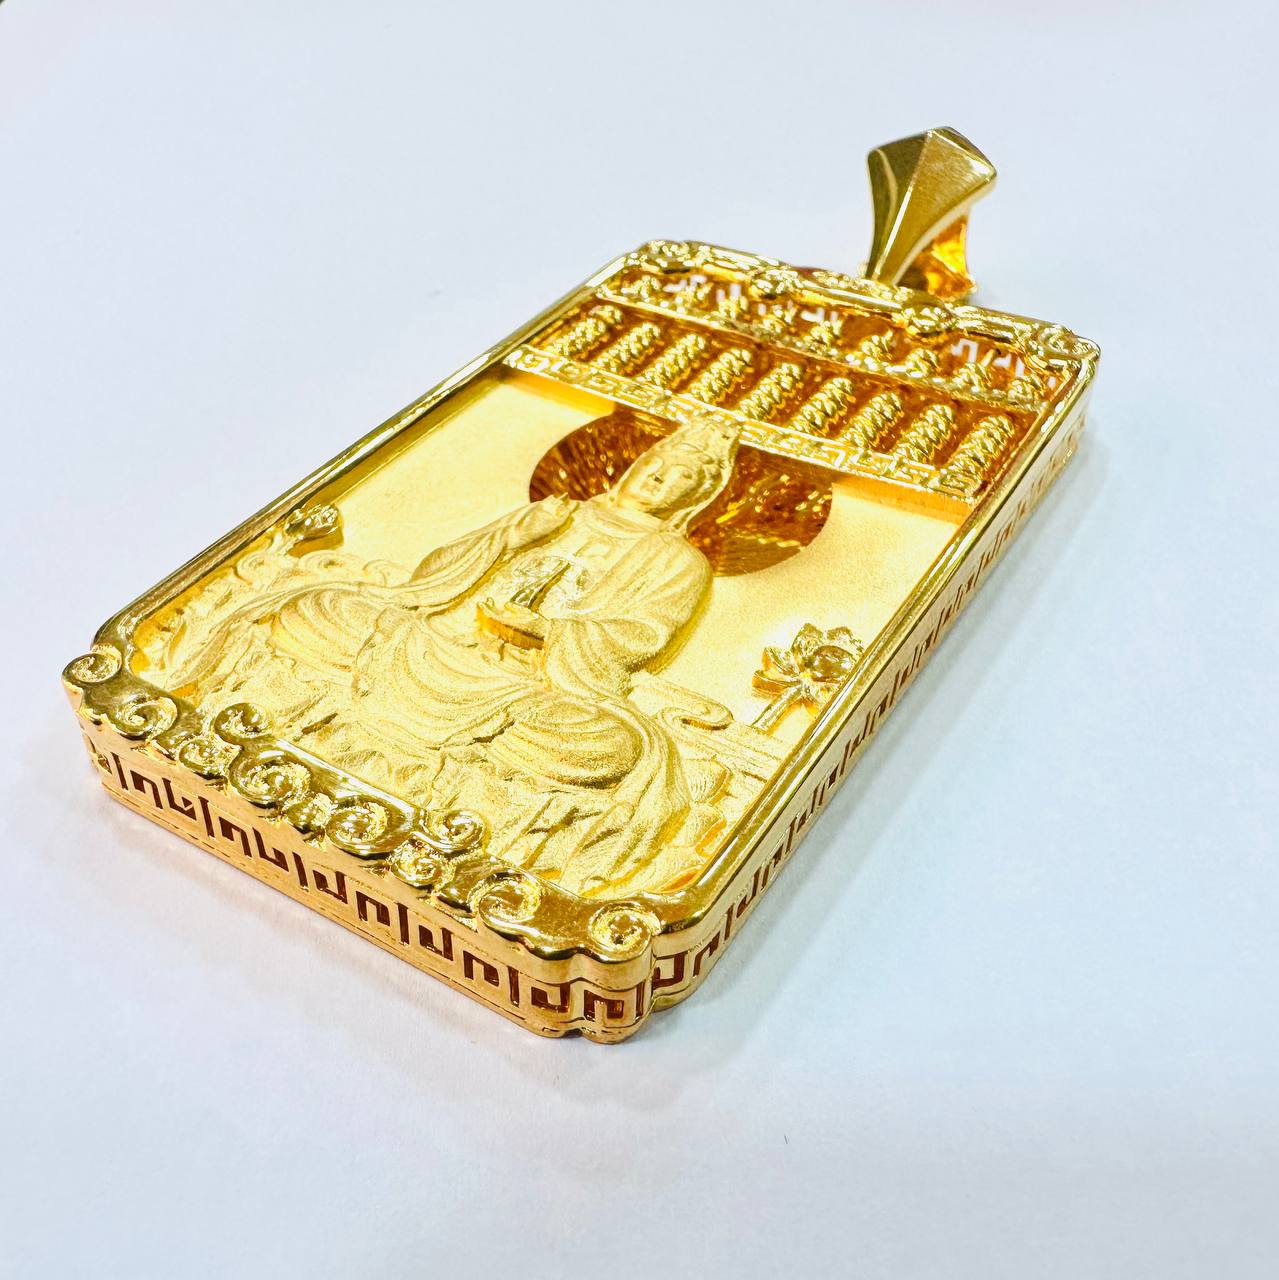 22k / 916 Gold Abacus Pendant with Design Big Size-916 gold-Best Gold Shop